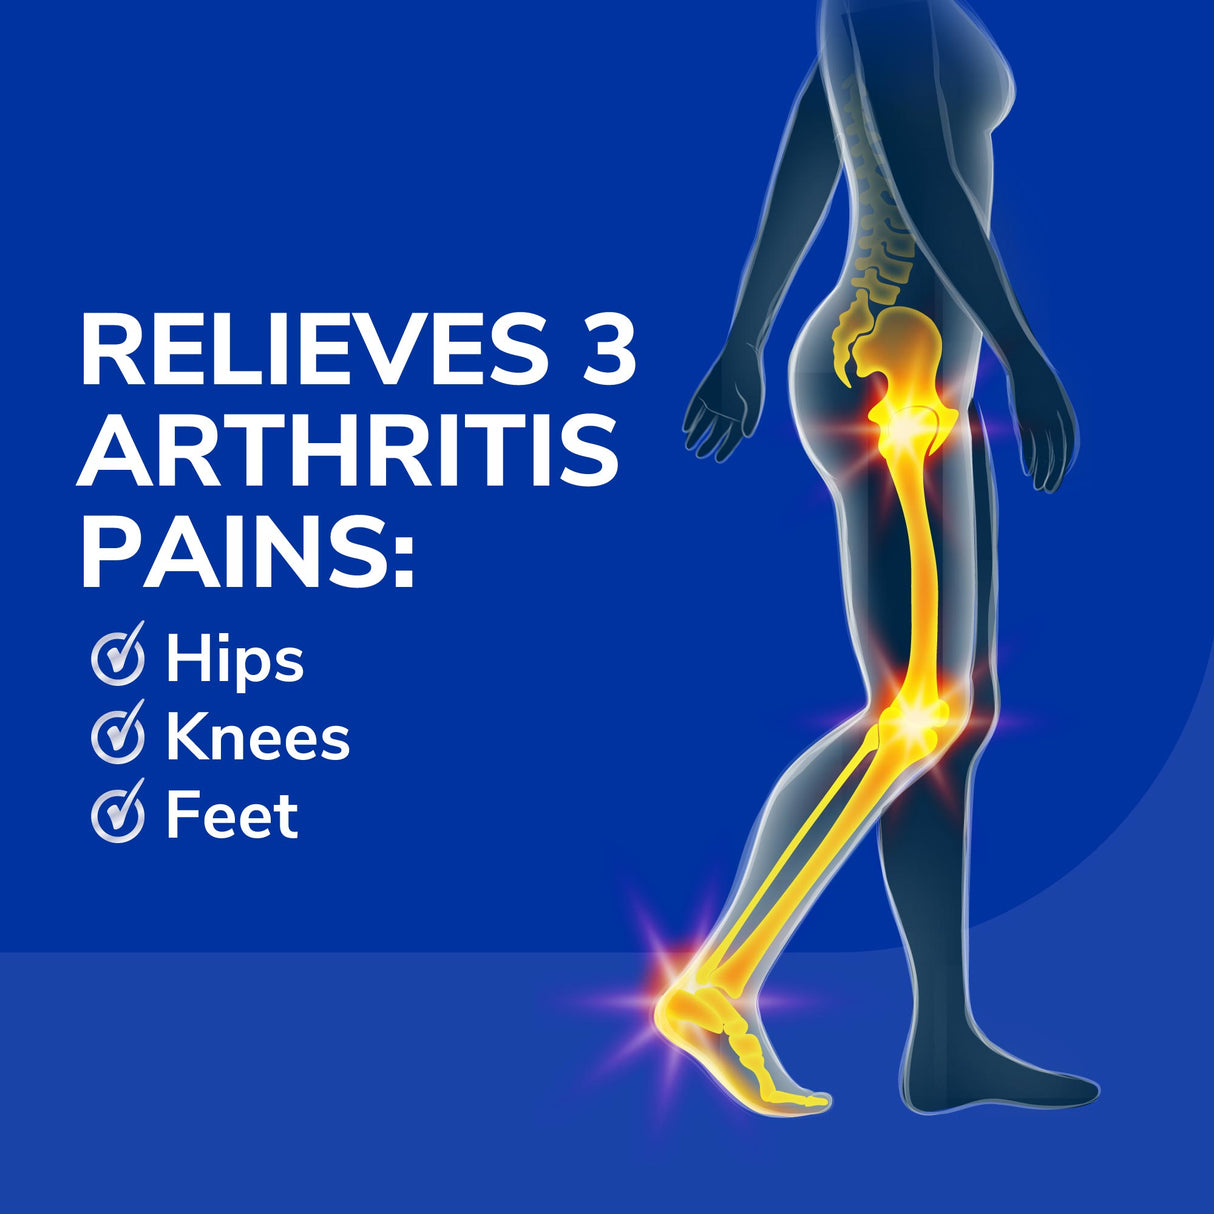 image of relieves arthritis pain in hips, knees and feet